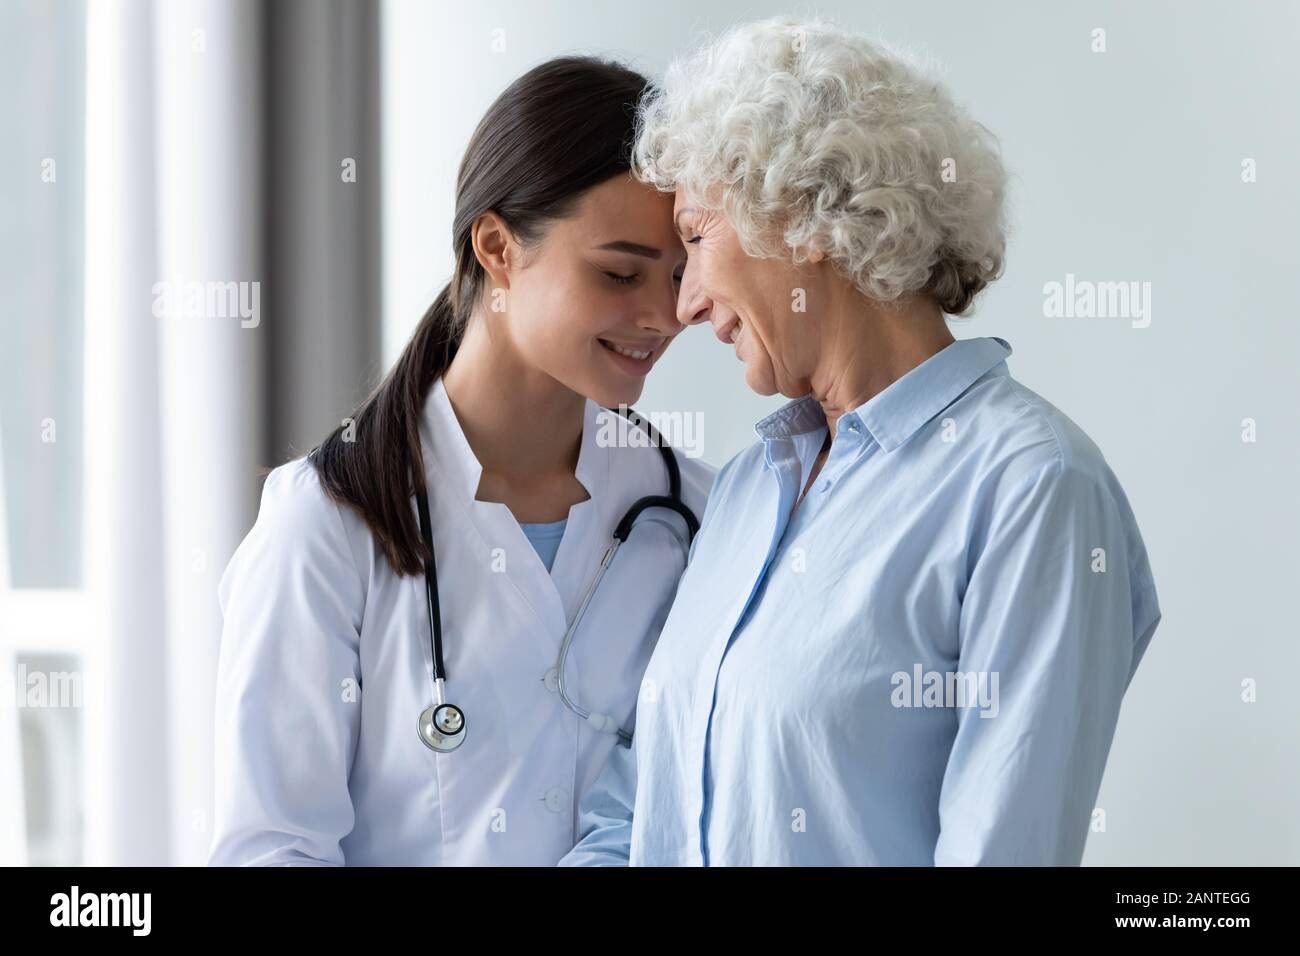 Smiling girl caregiver and happy older woman touching foreheads Stock Photo